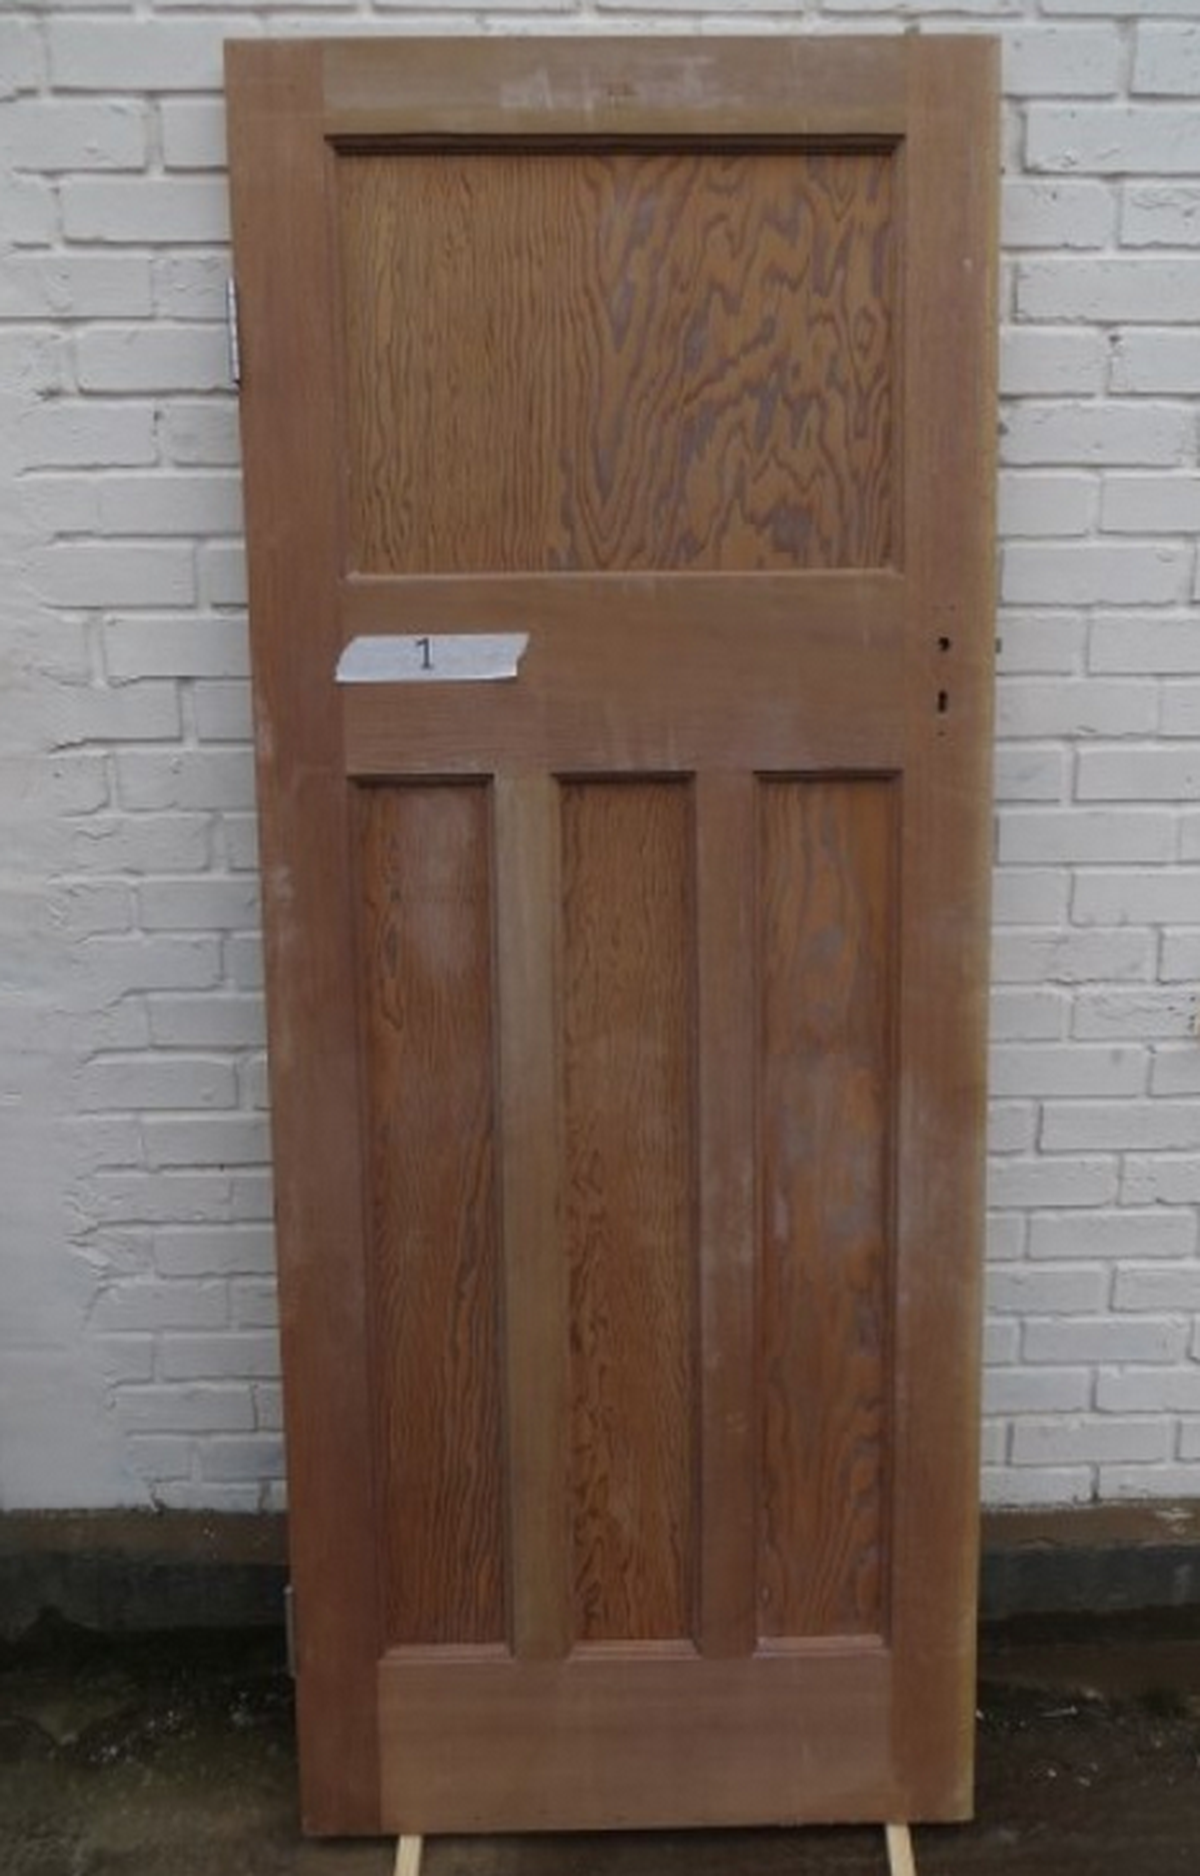 Secondhand Vintage and Reclaimed Doors and Windows ...